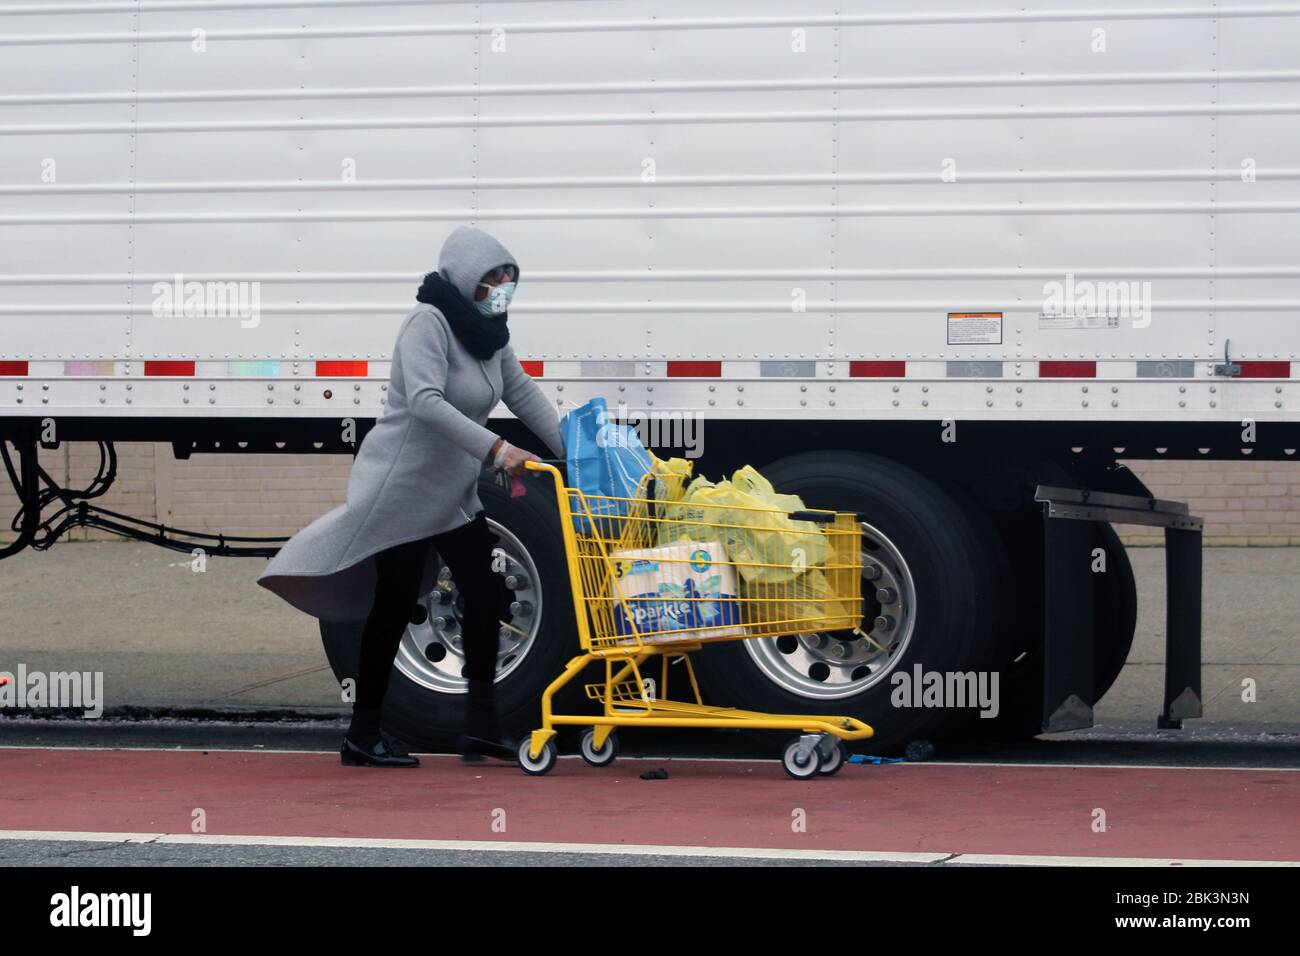 New York, New York, USA. 30th Apr, 2020. This employee masked face pushes a shopping cart containing cleaning products along a refrigerated truck to the Andrew T. Cleckley Funeral Home in Brooklyn where bodies non properly cared are removed. 60 corpses were stored in 4 rented vehiciles lining the street nearby stores. Neighbors reported a foul smell still persistent and fluids dripping from the trucks. Some remains were also found lying on the facilityÃ¢â‚¬â„¢s floor. The funeral home was overwhelmed by COVID-19 deaths in New York. Credit: Marie Le Ble/ZUMA Wire/Alamy Live News Stock Photo